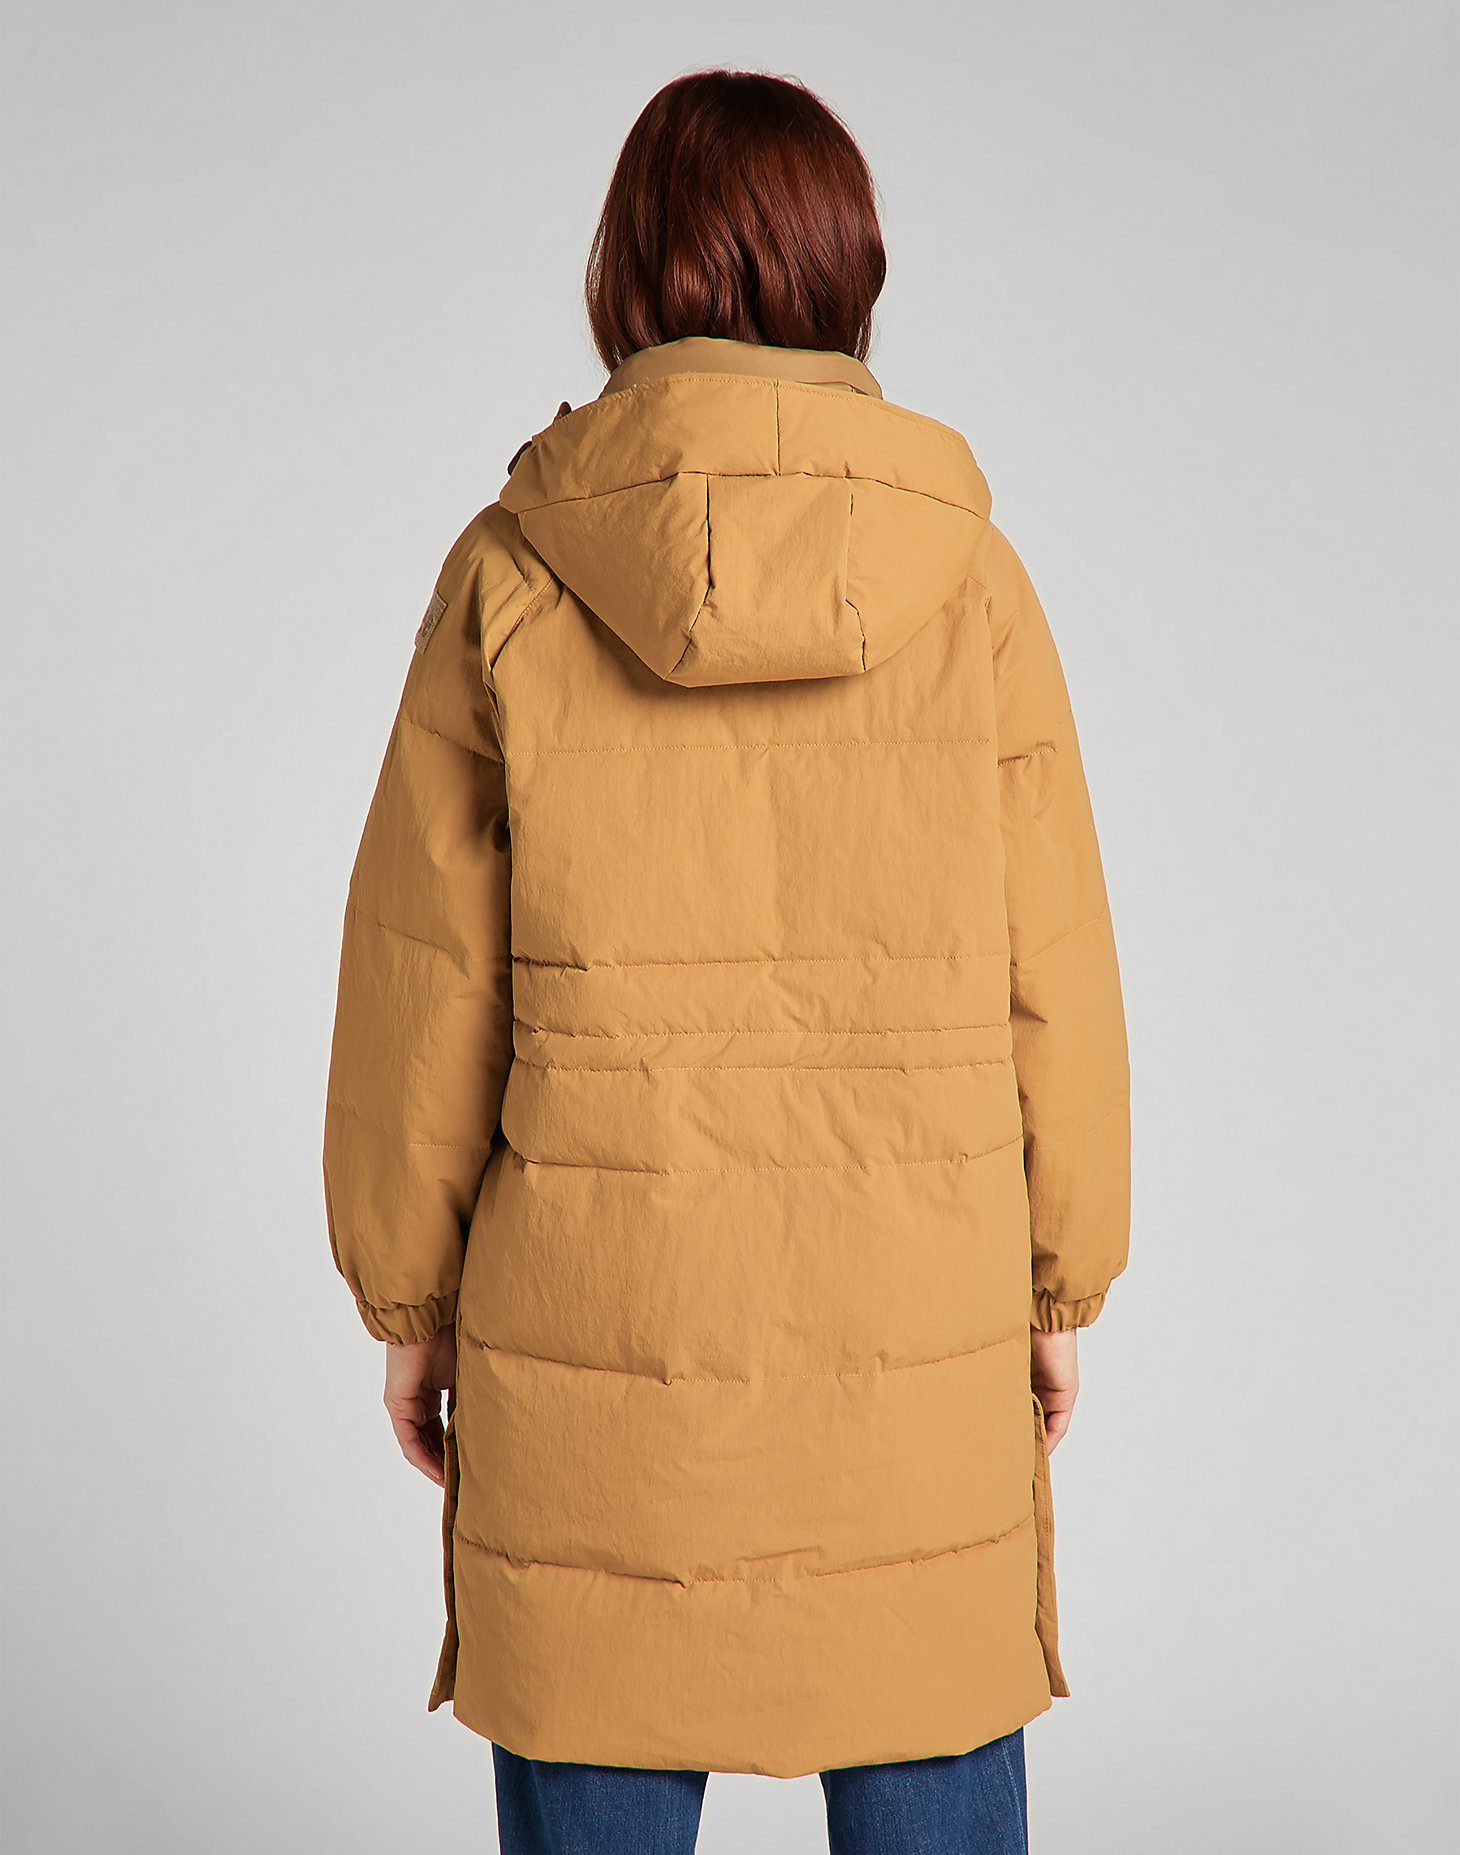 Long Puffer Jacket in Tobacco Brown alternative view 1